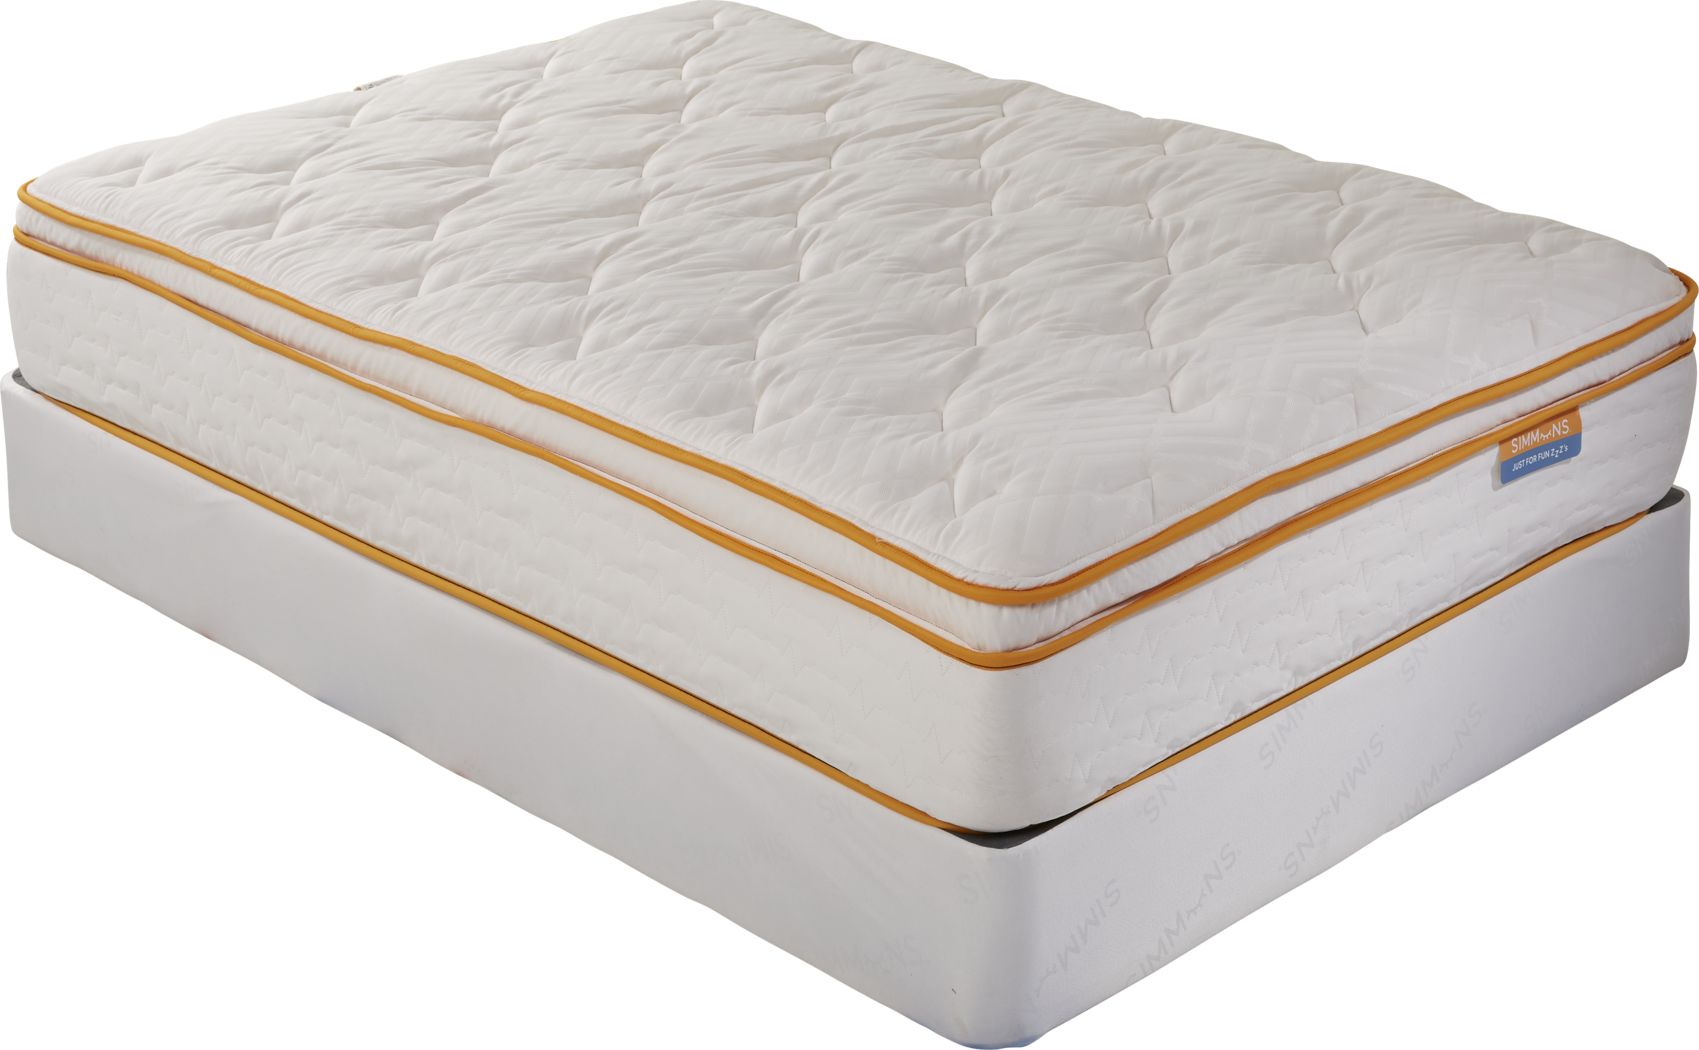 rooms to go firm mattress